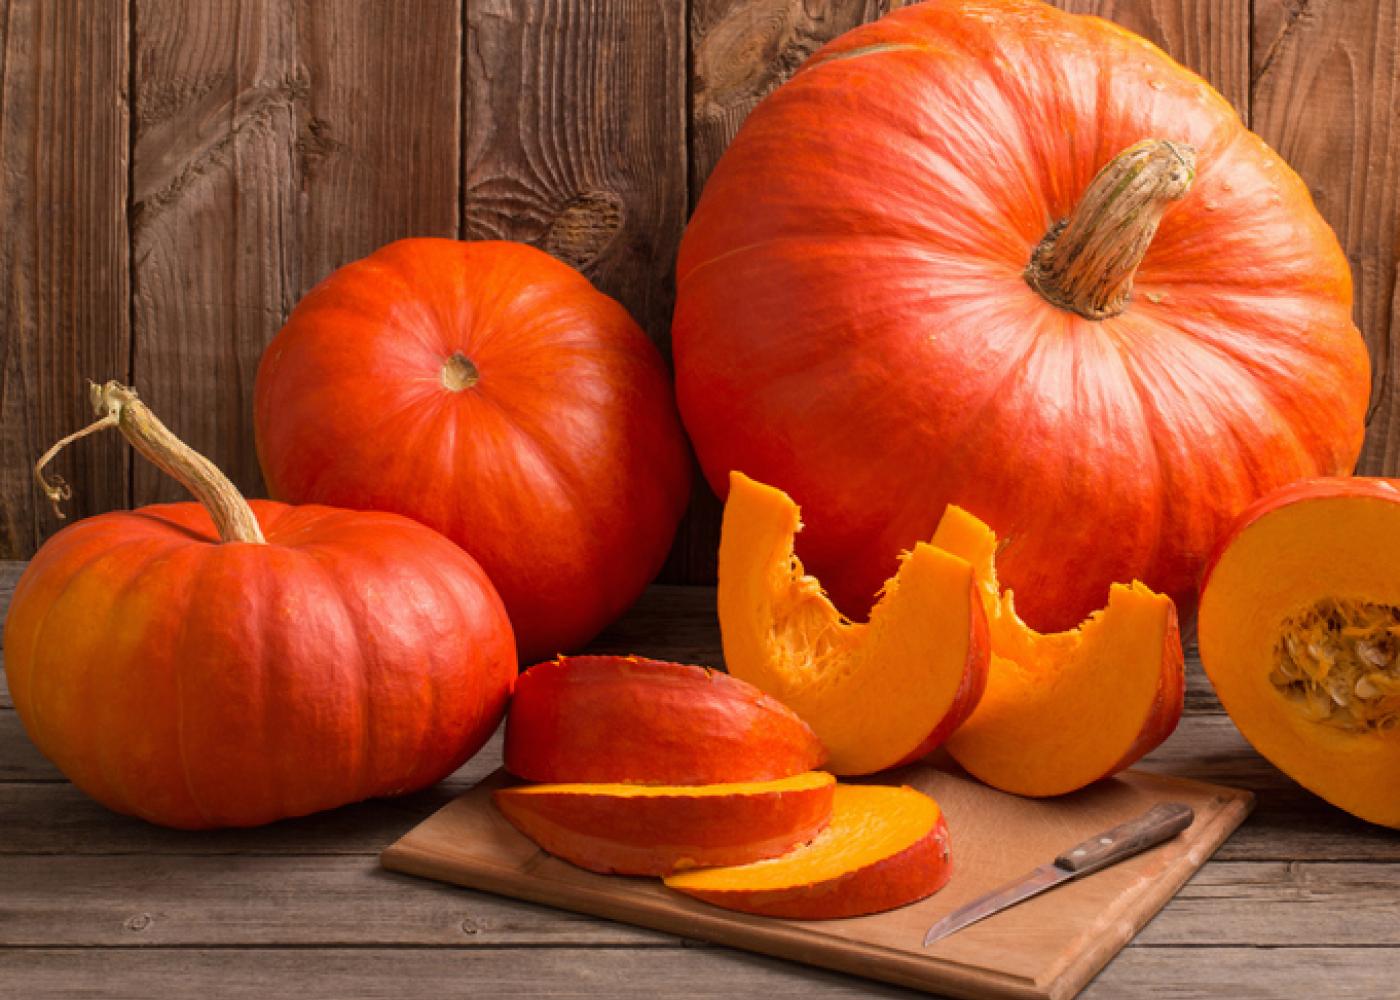 Choose smaller pumpkins for baking. They tend to be less stringy.